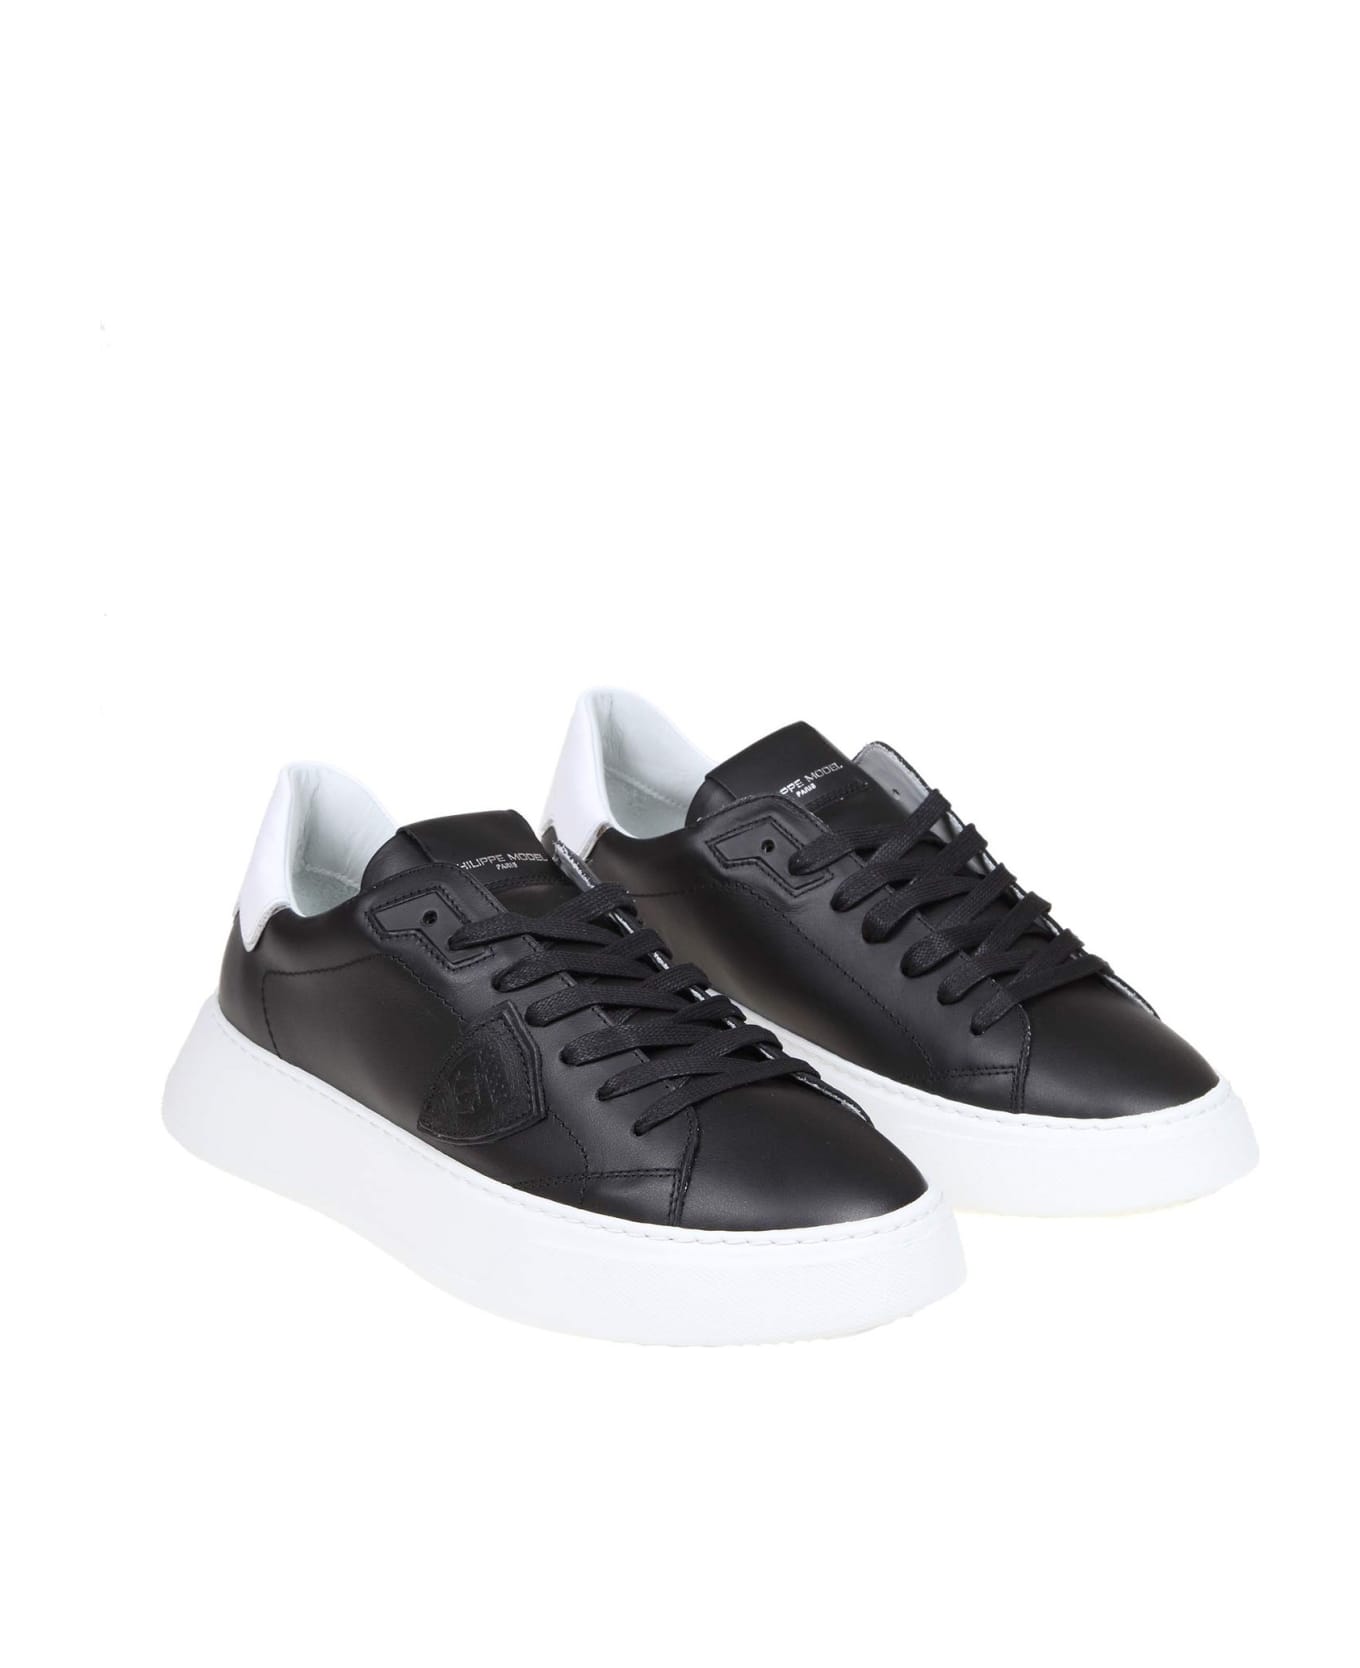 Philippe Model Temple Sneakers In Black Leather - Black /White